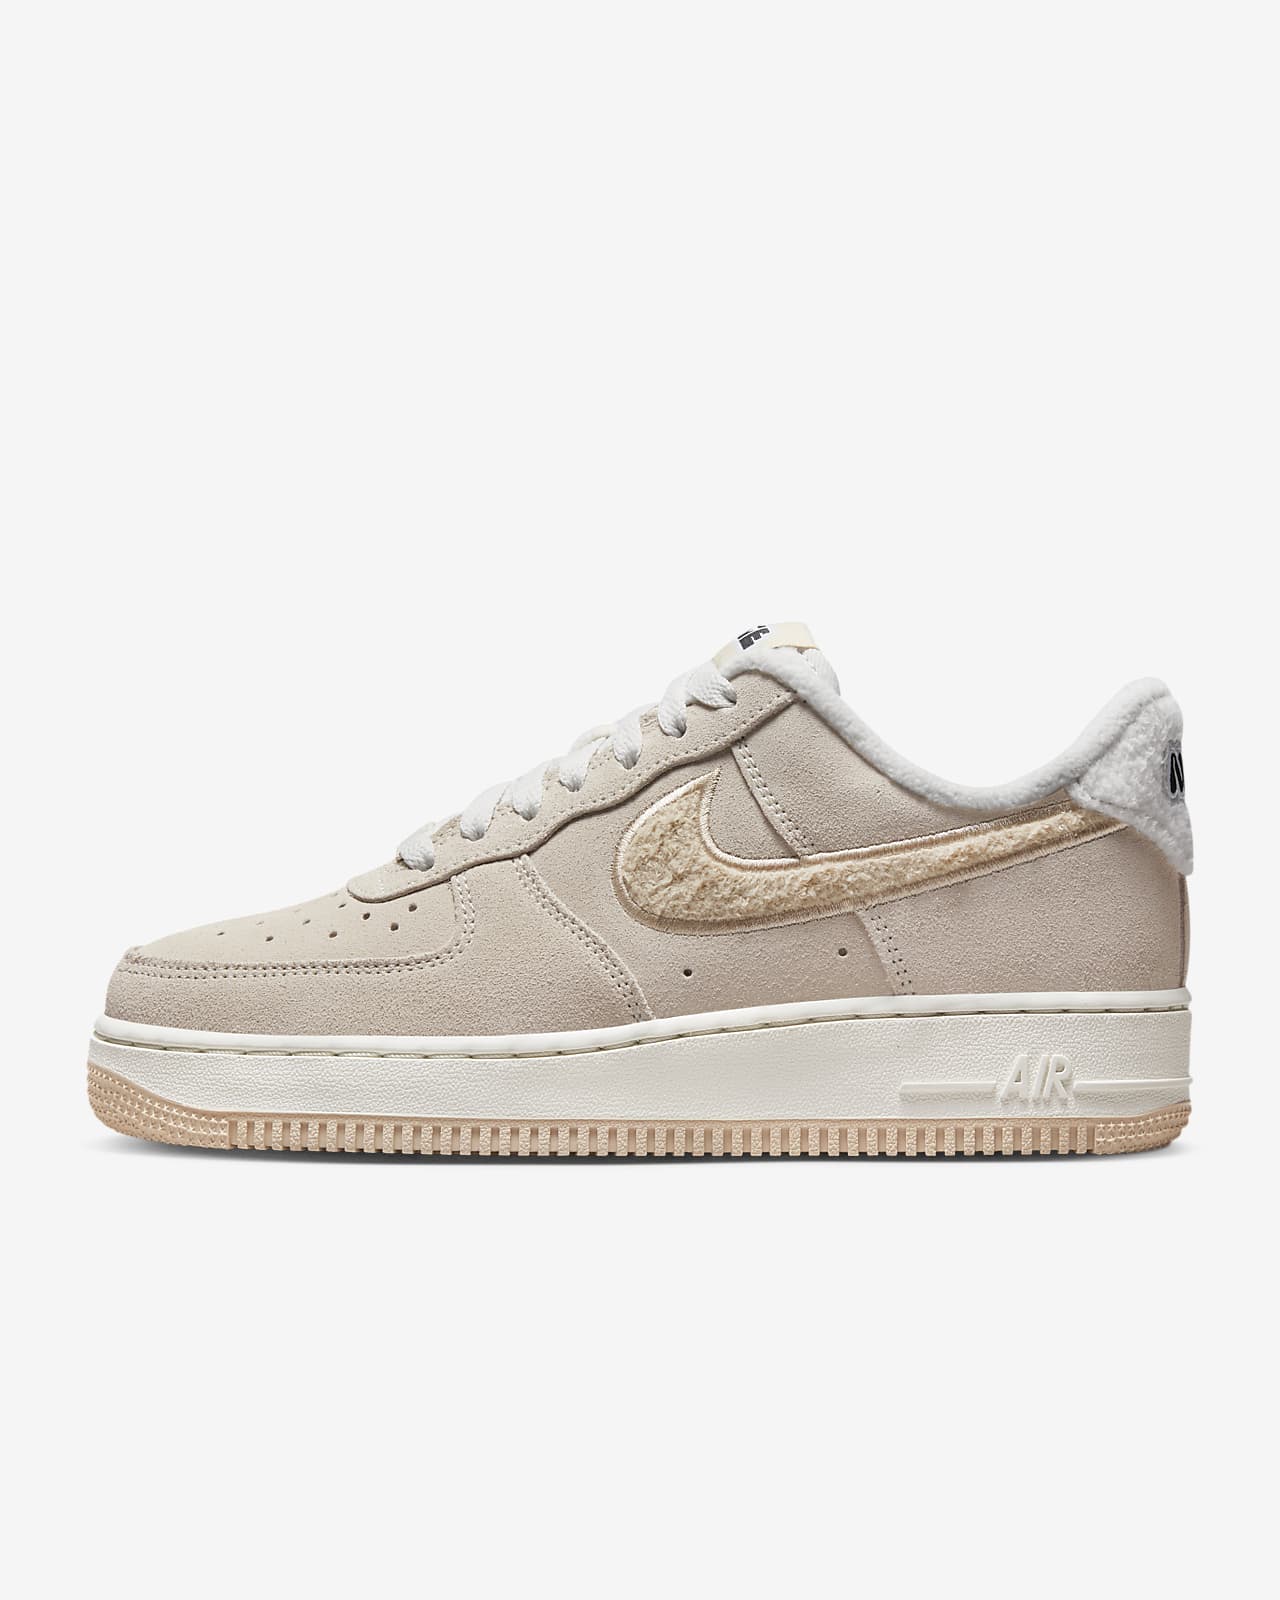 ethical Pig Retire Nike Air Force 1 '07 SE Women's Shoes. Nike.com